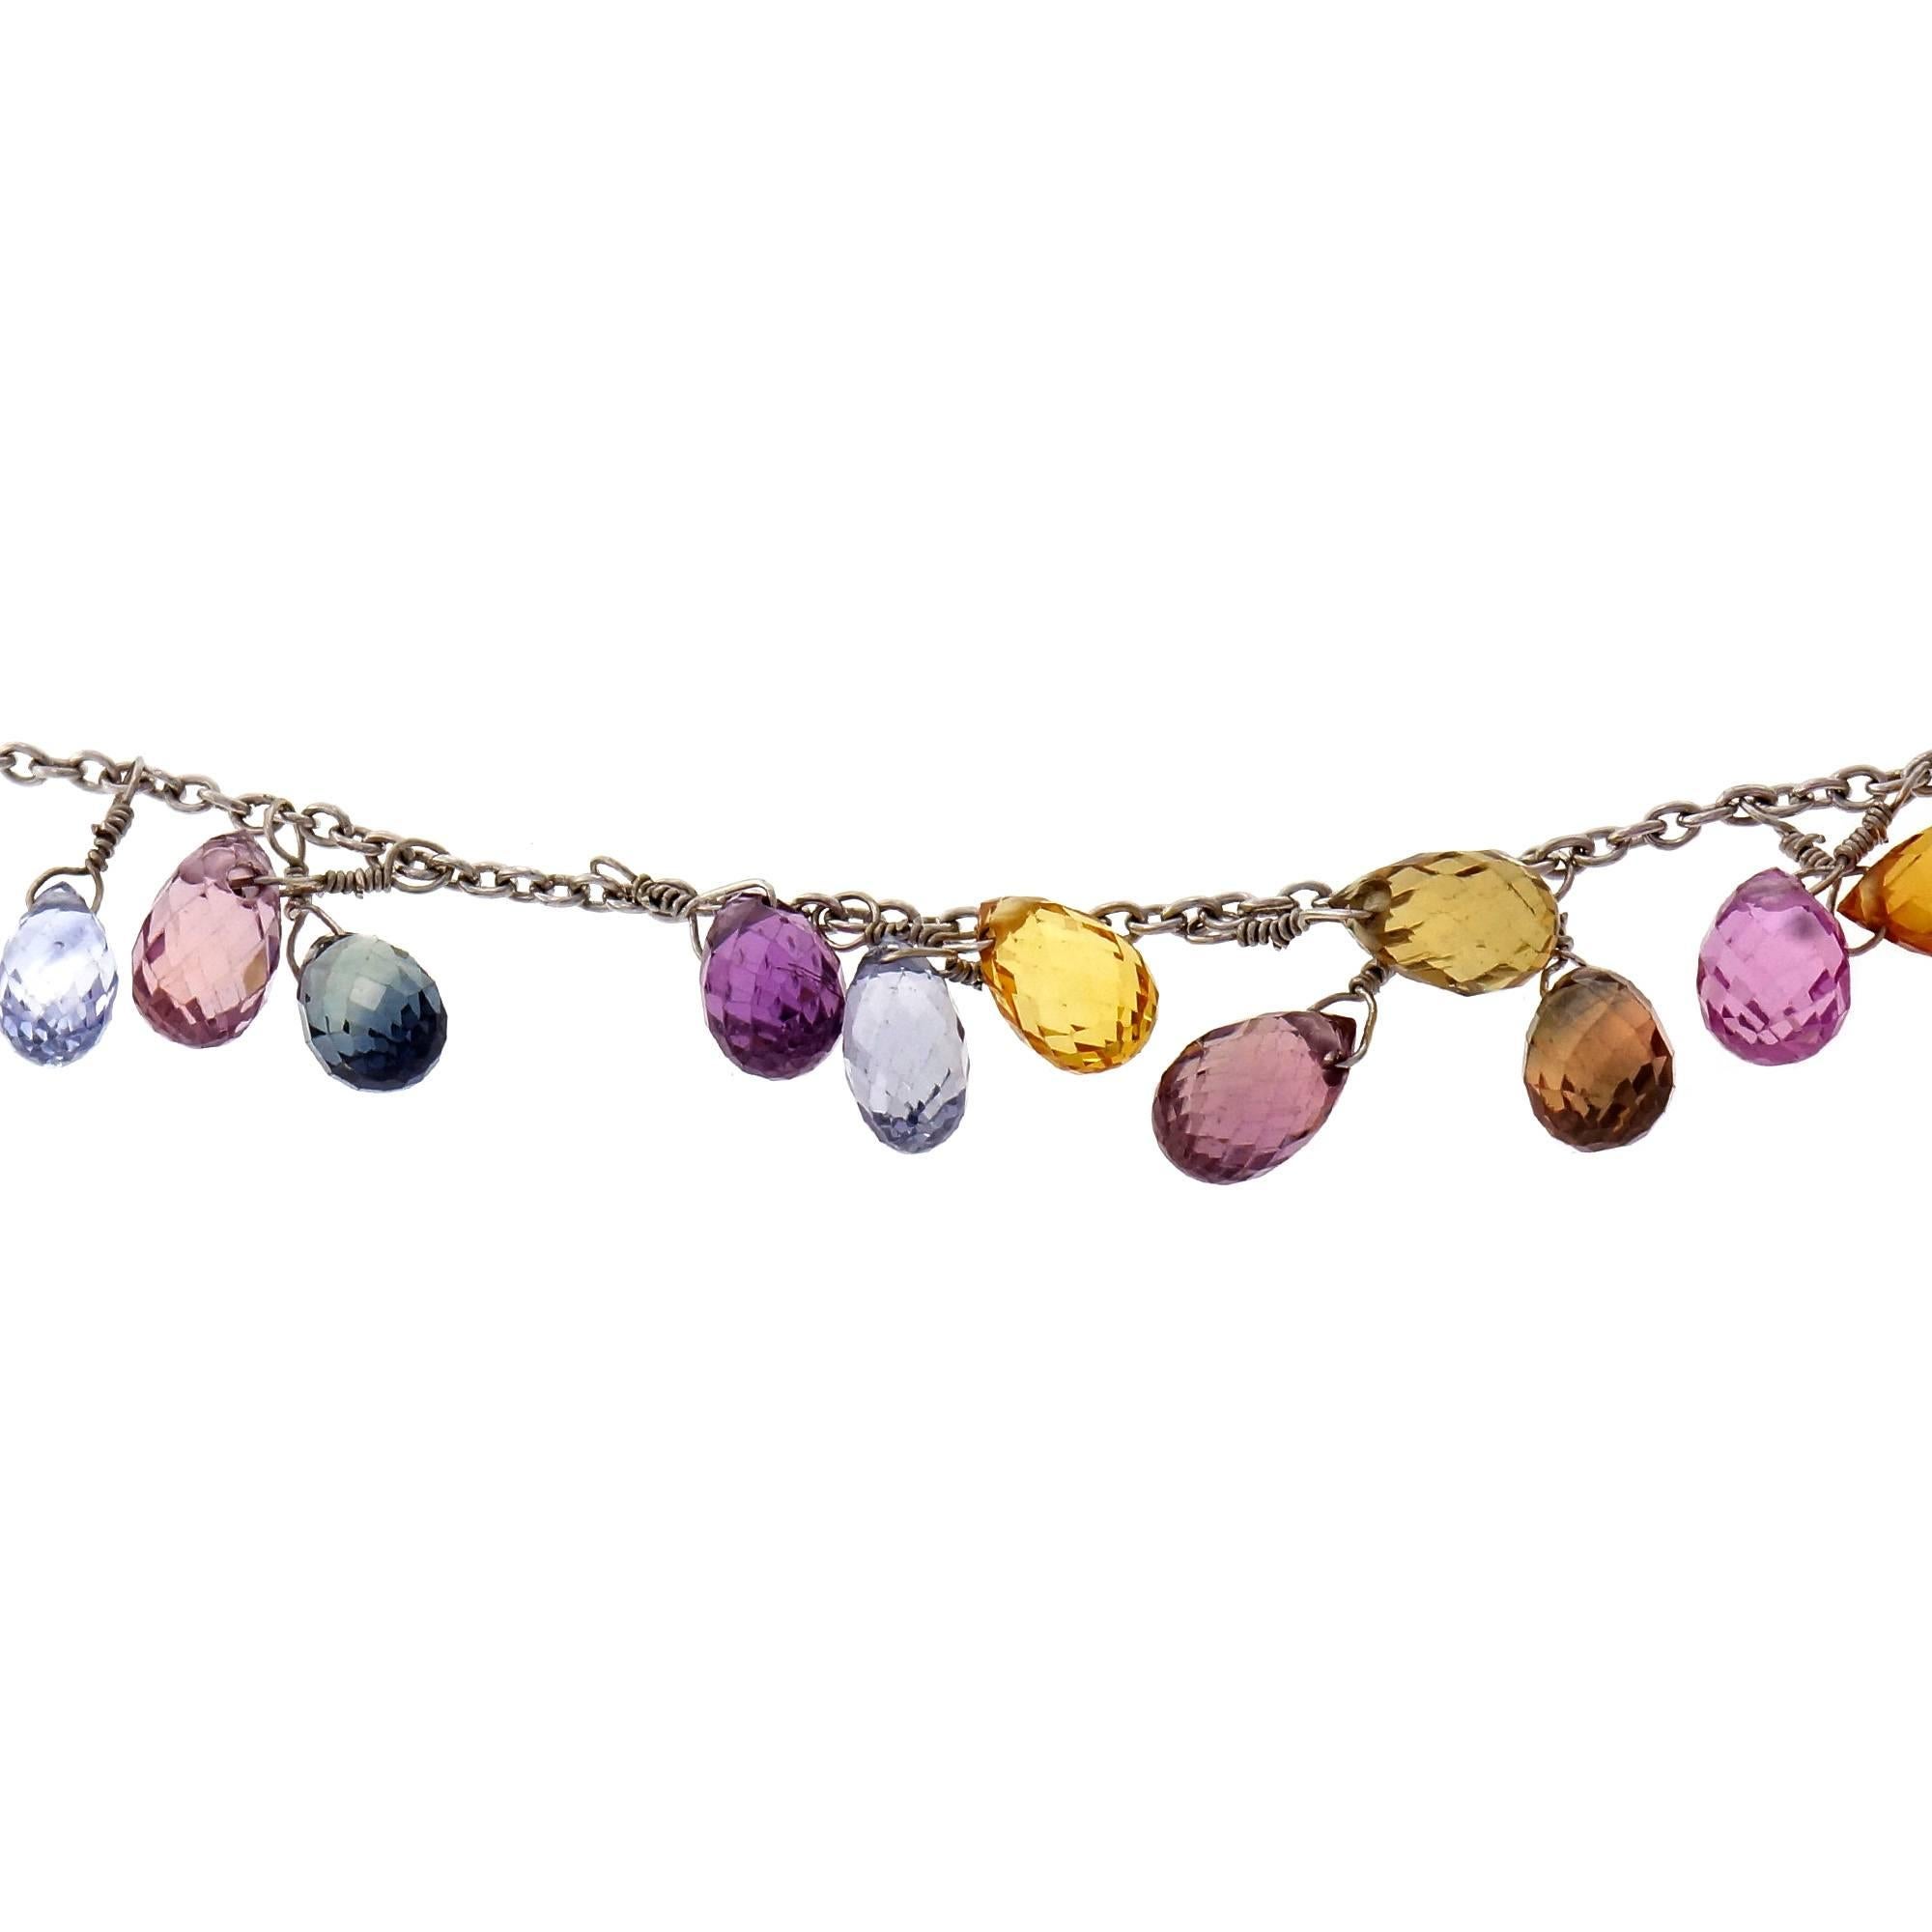 Multi-color genuine Sapphire hand wired Briolette necklace with 55 Sapphires in shades of blue, pink, yellow and green.

55 Briolette Sapphires, blue, pink, yellow and green, approx. total weight 55.00cts, 
18k white gold
13.9 grams 
Tested: 18k